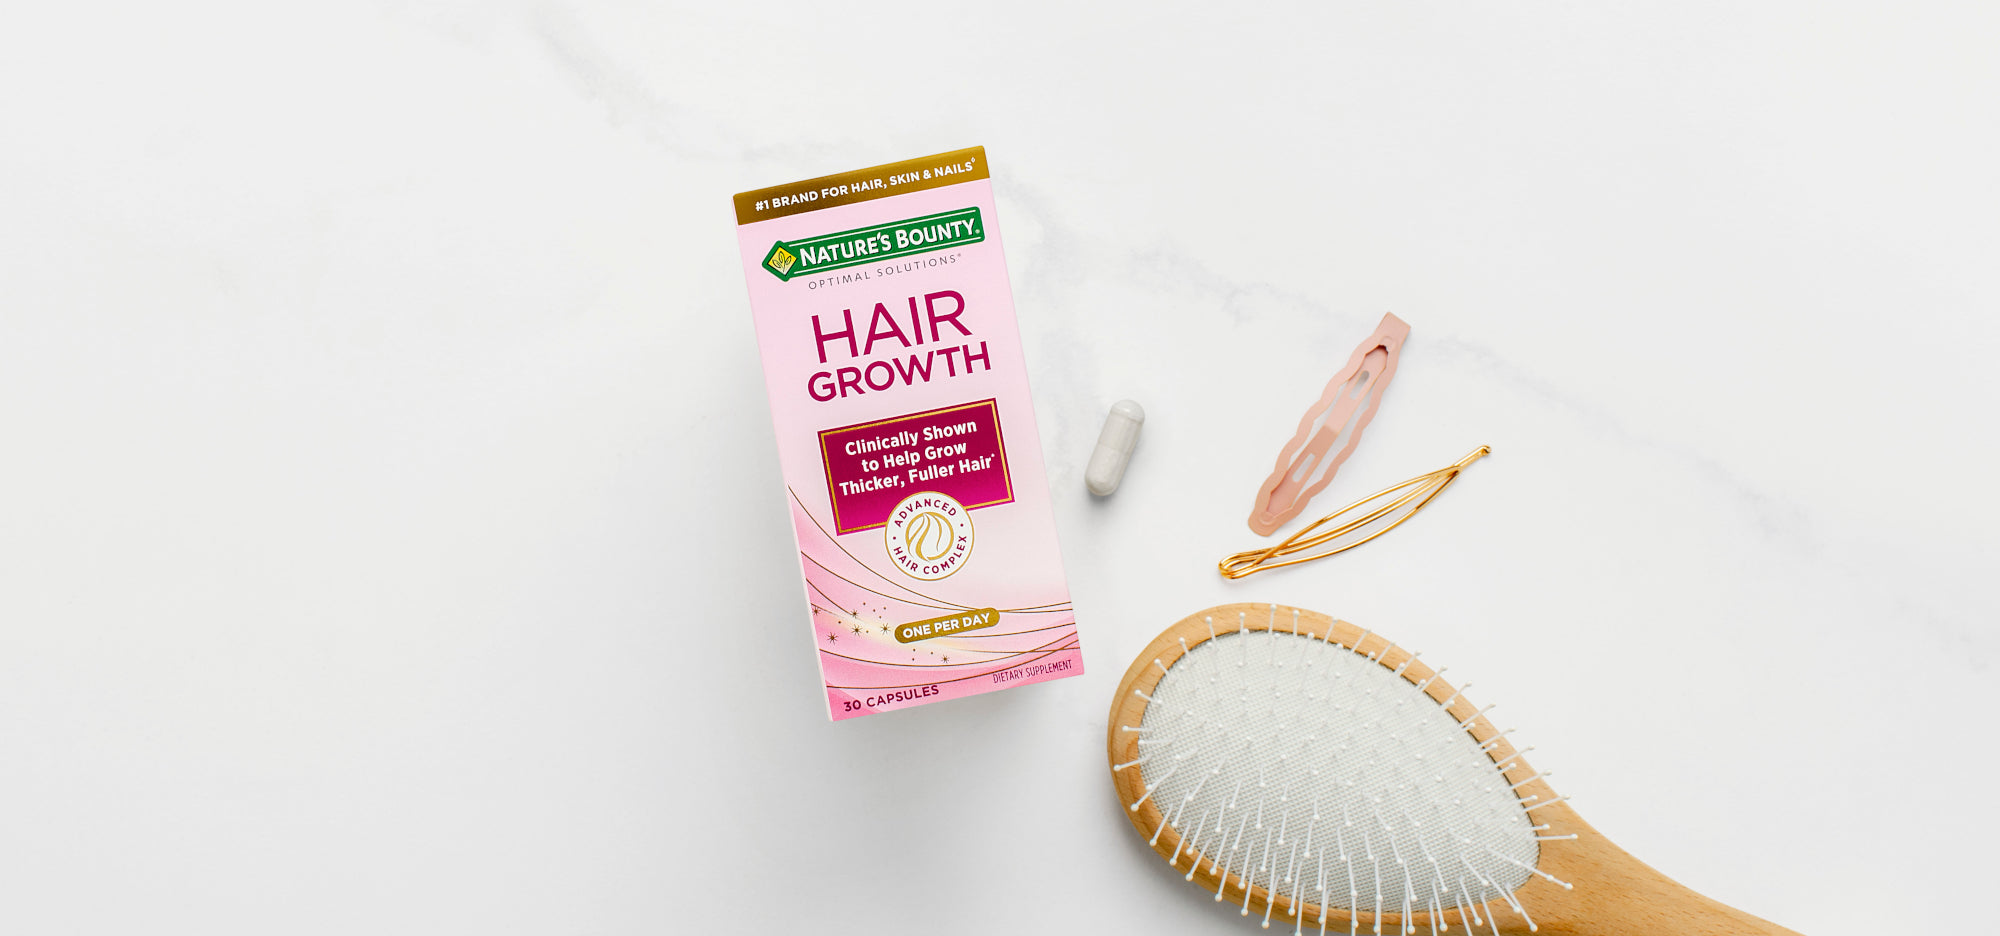 Support Thicker, Fuller Hair with Our New Supplement For Hair Growth*